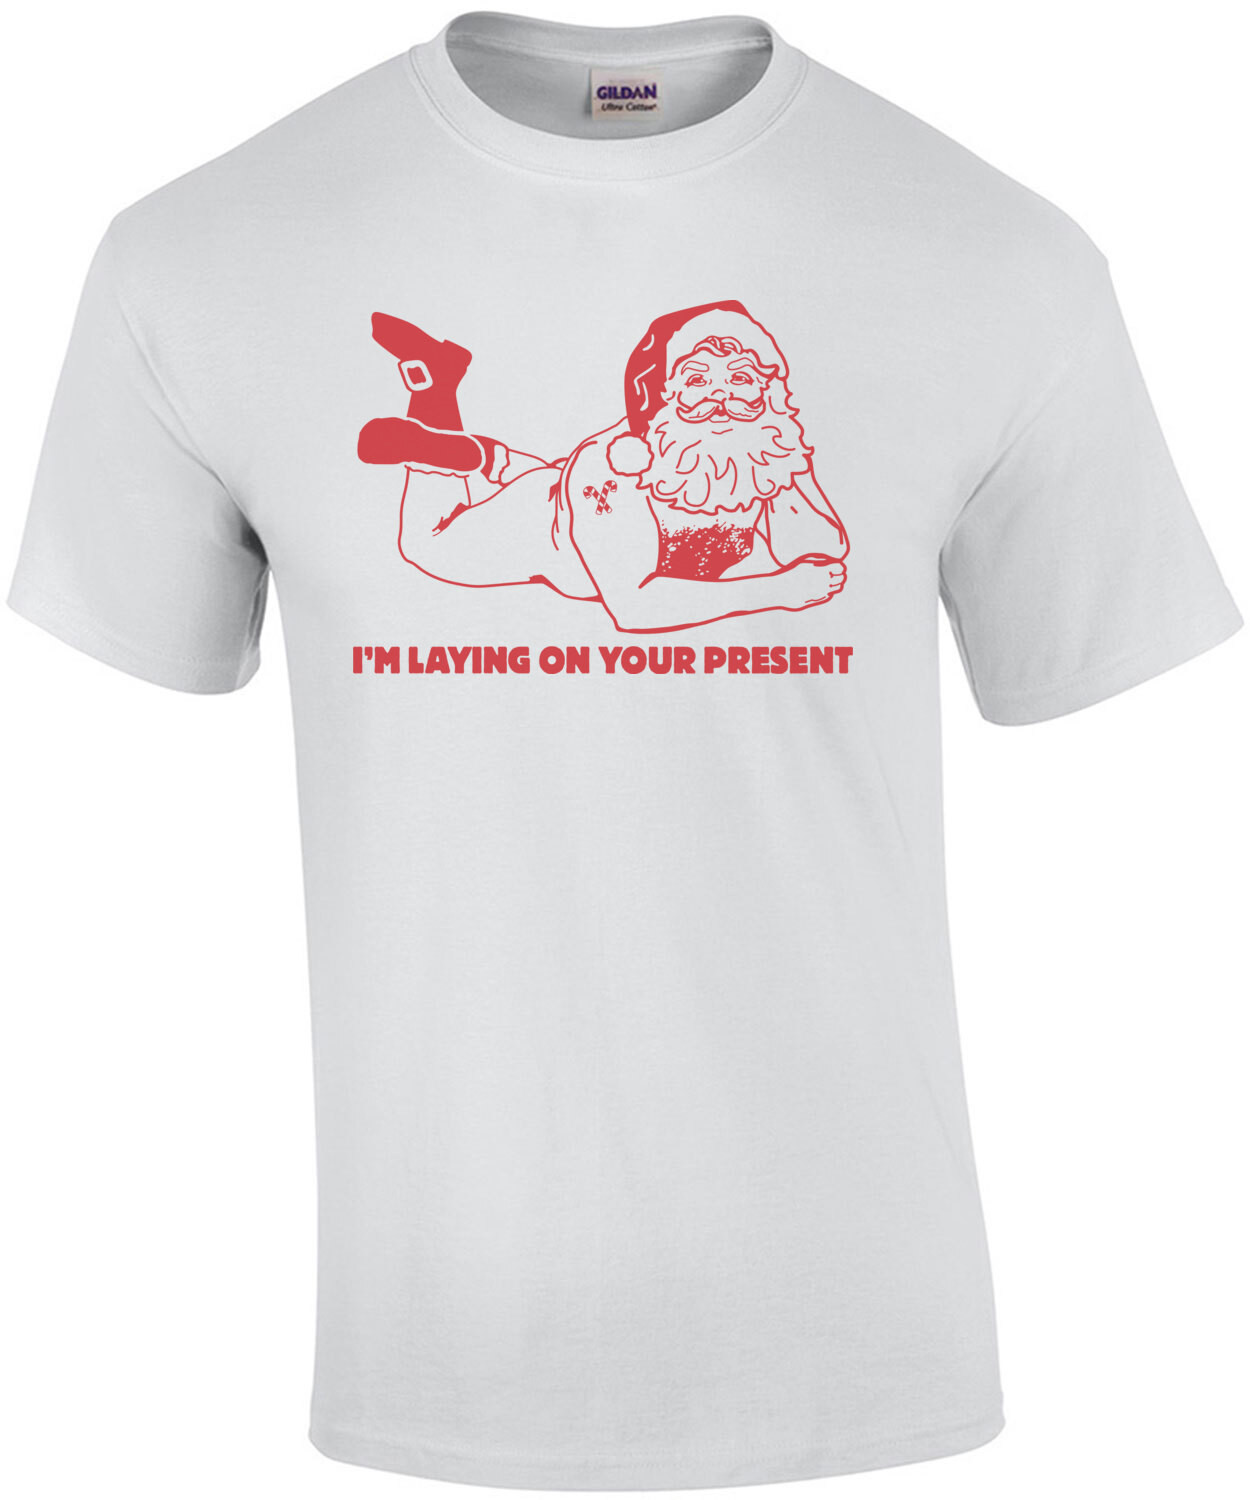 I'm laying on your present. Funny offensive sexual Christmas T-Shirt